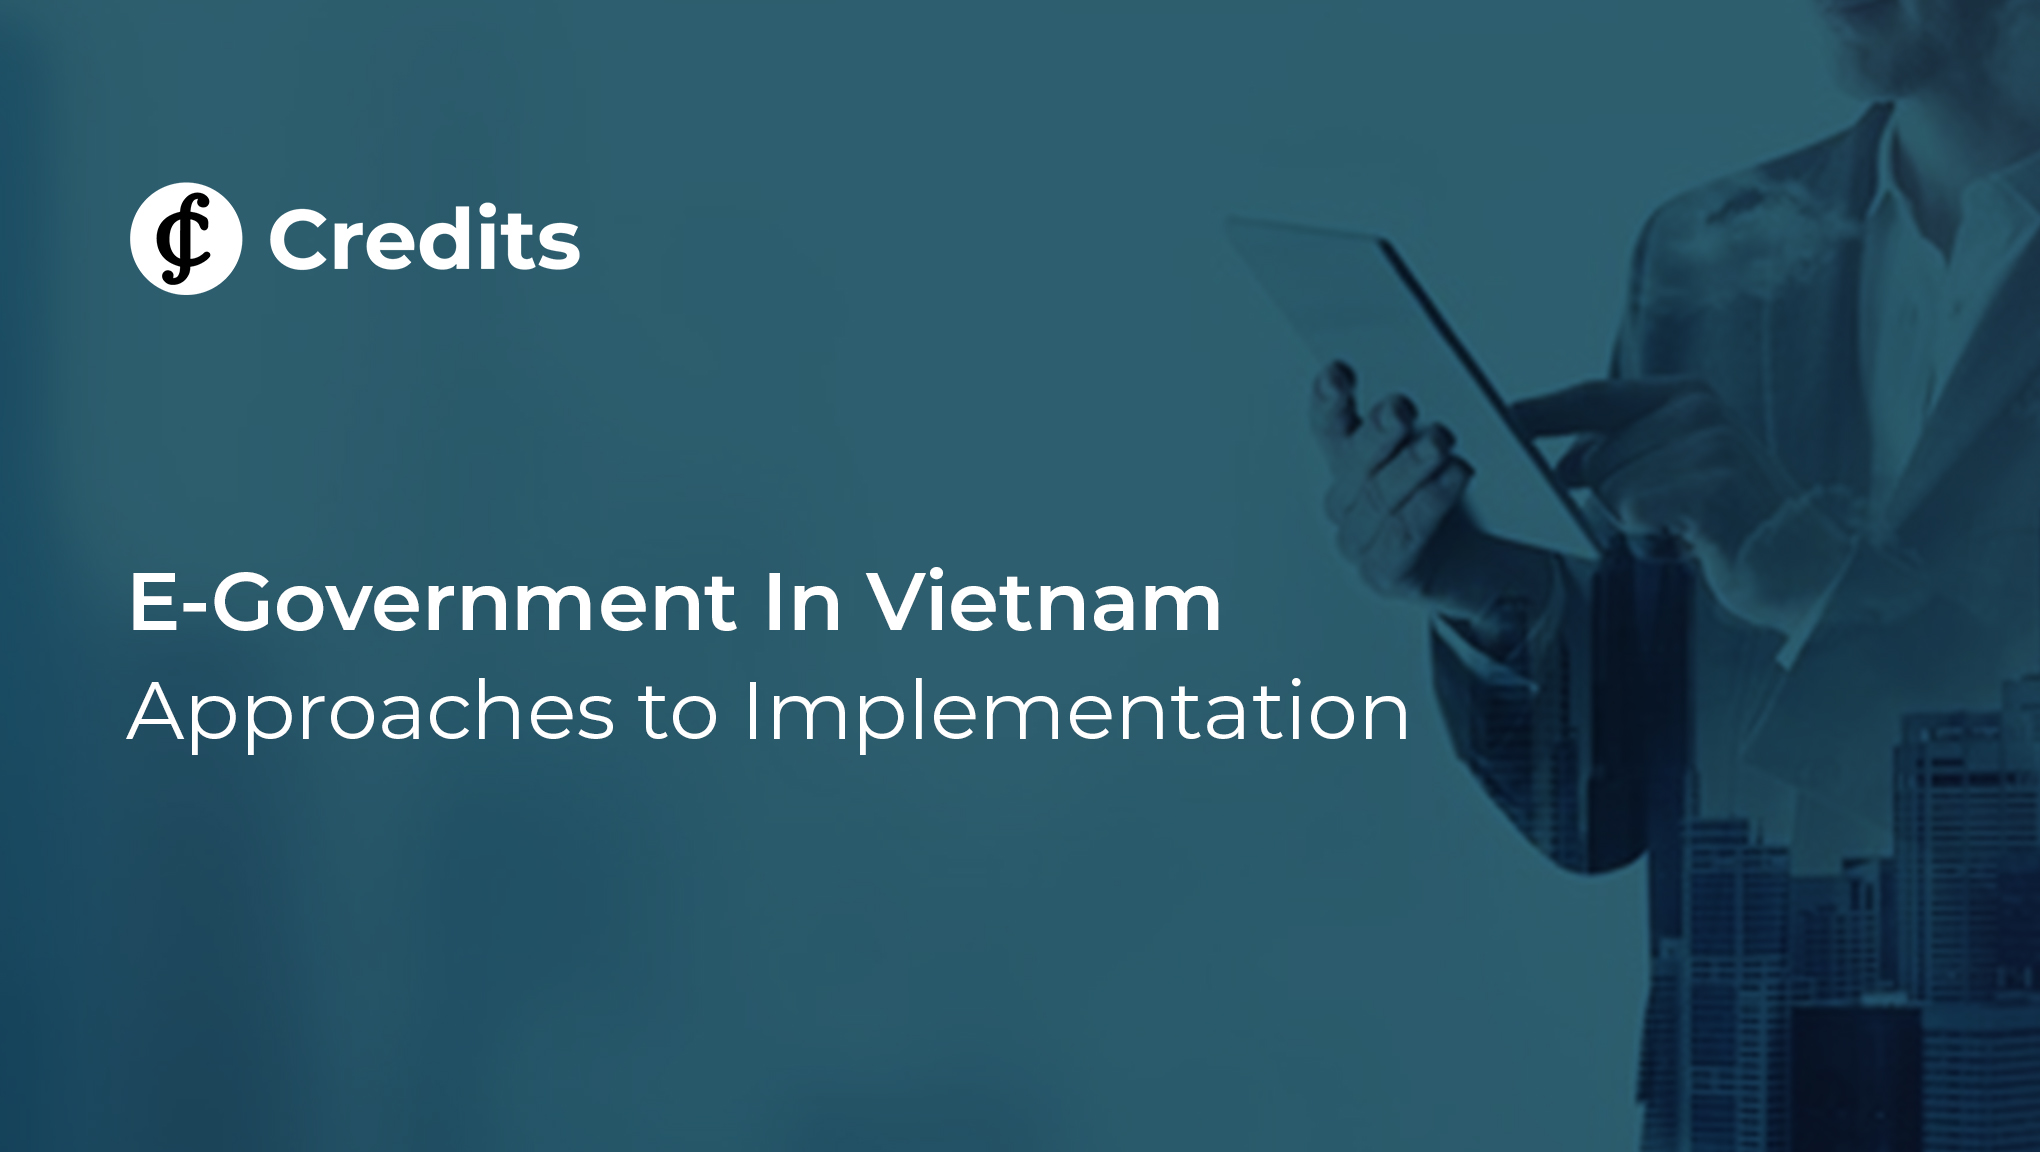 E-Government In Vietnam: Issues And Approaches To Implementation Through The Use of Blockchain Technologies